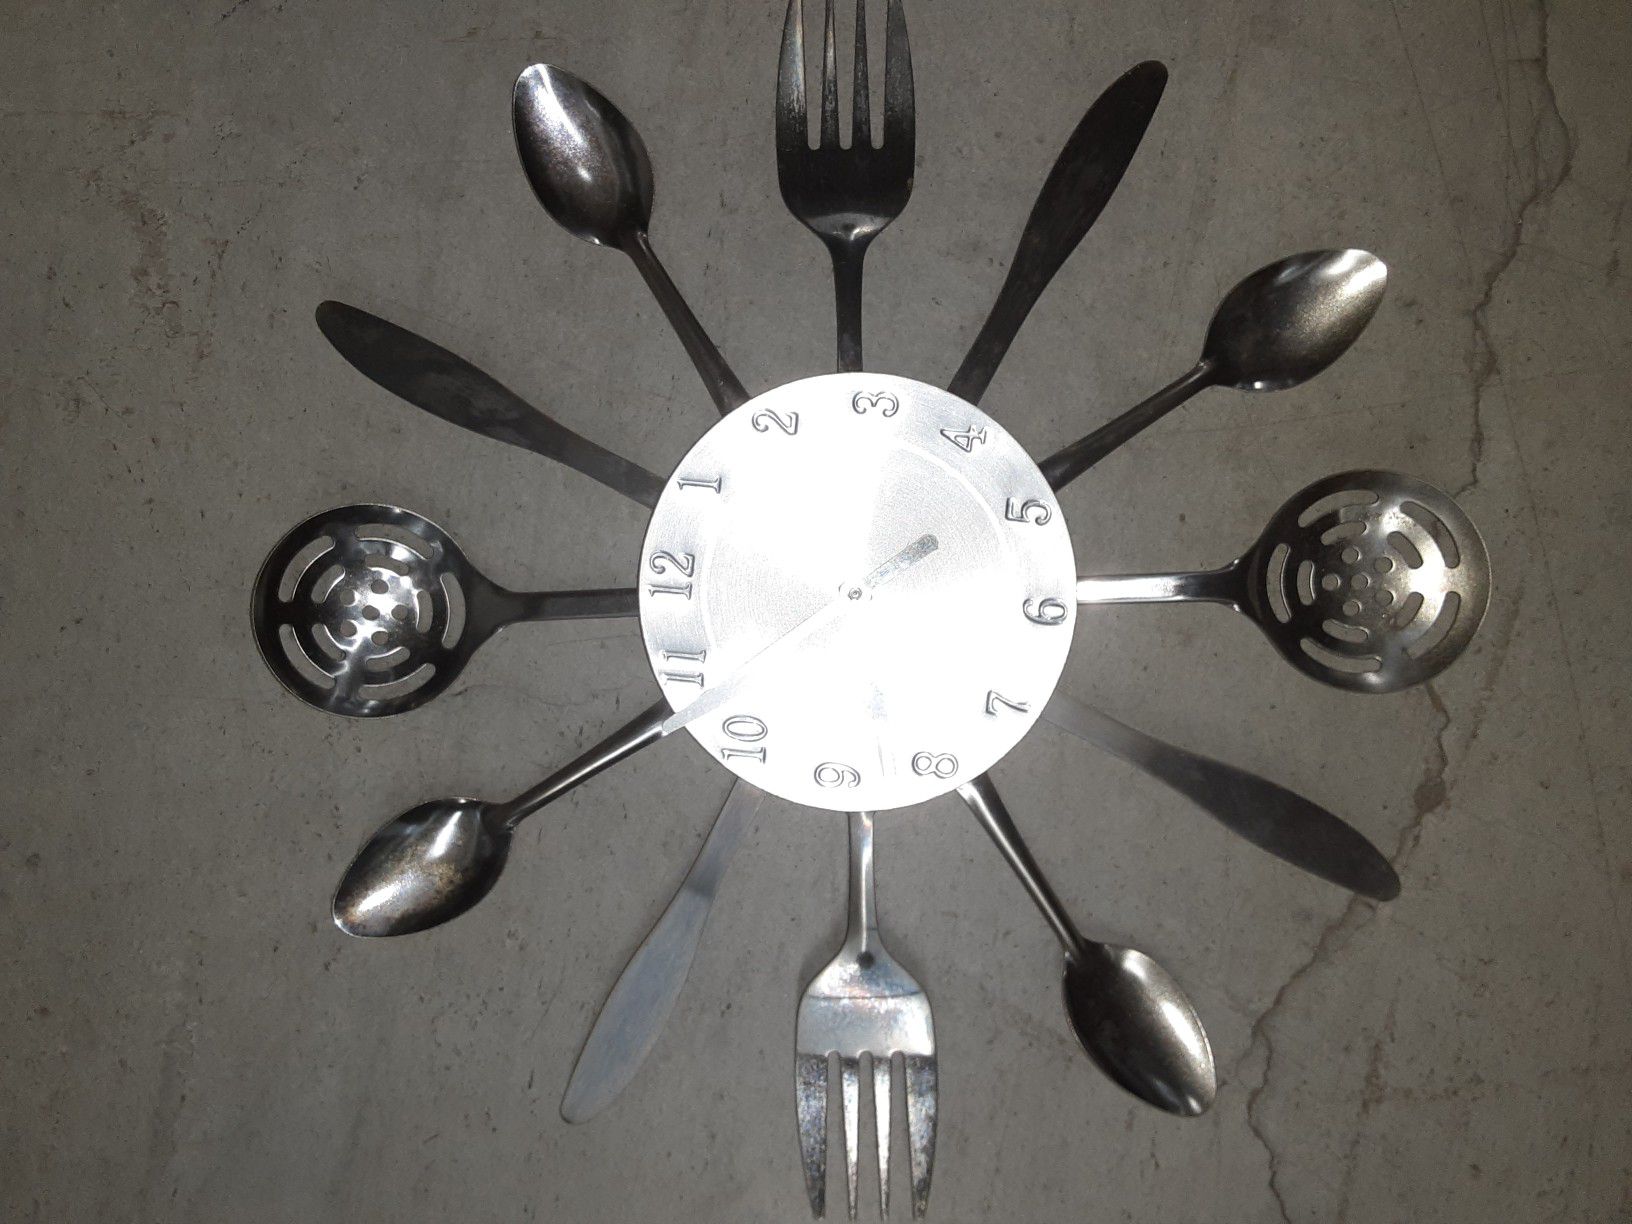 A household clock made out of silver kitchen utensils